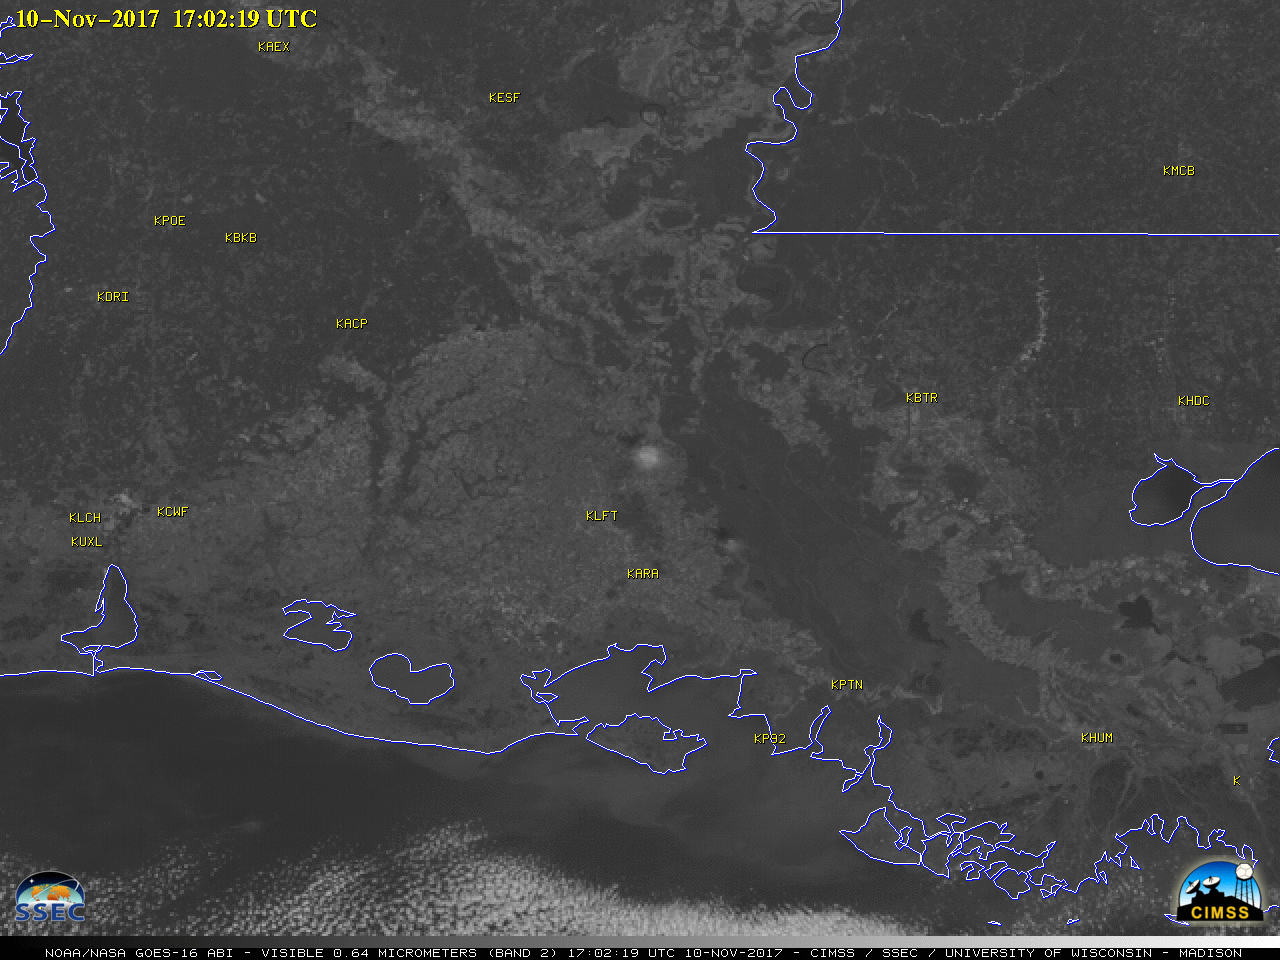 GOES-16 Visible (0.64 µm) images, with surface station identifiers plotted in yellow [click to play MP4 animation]